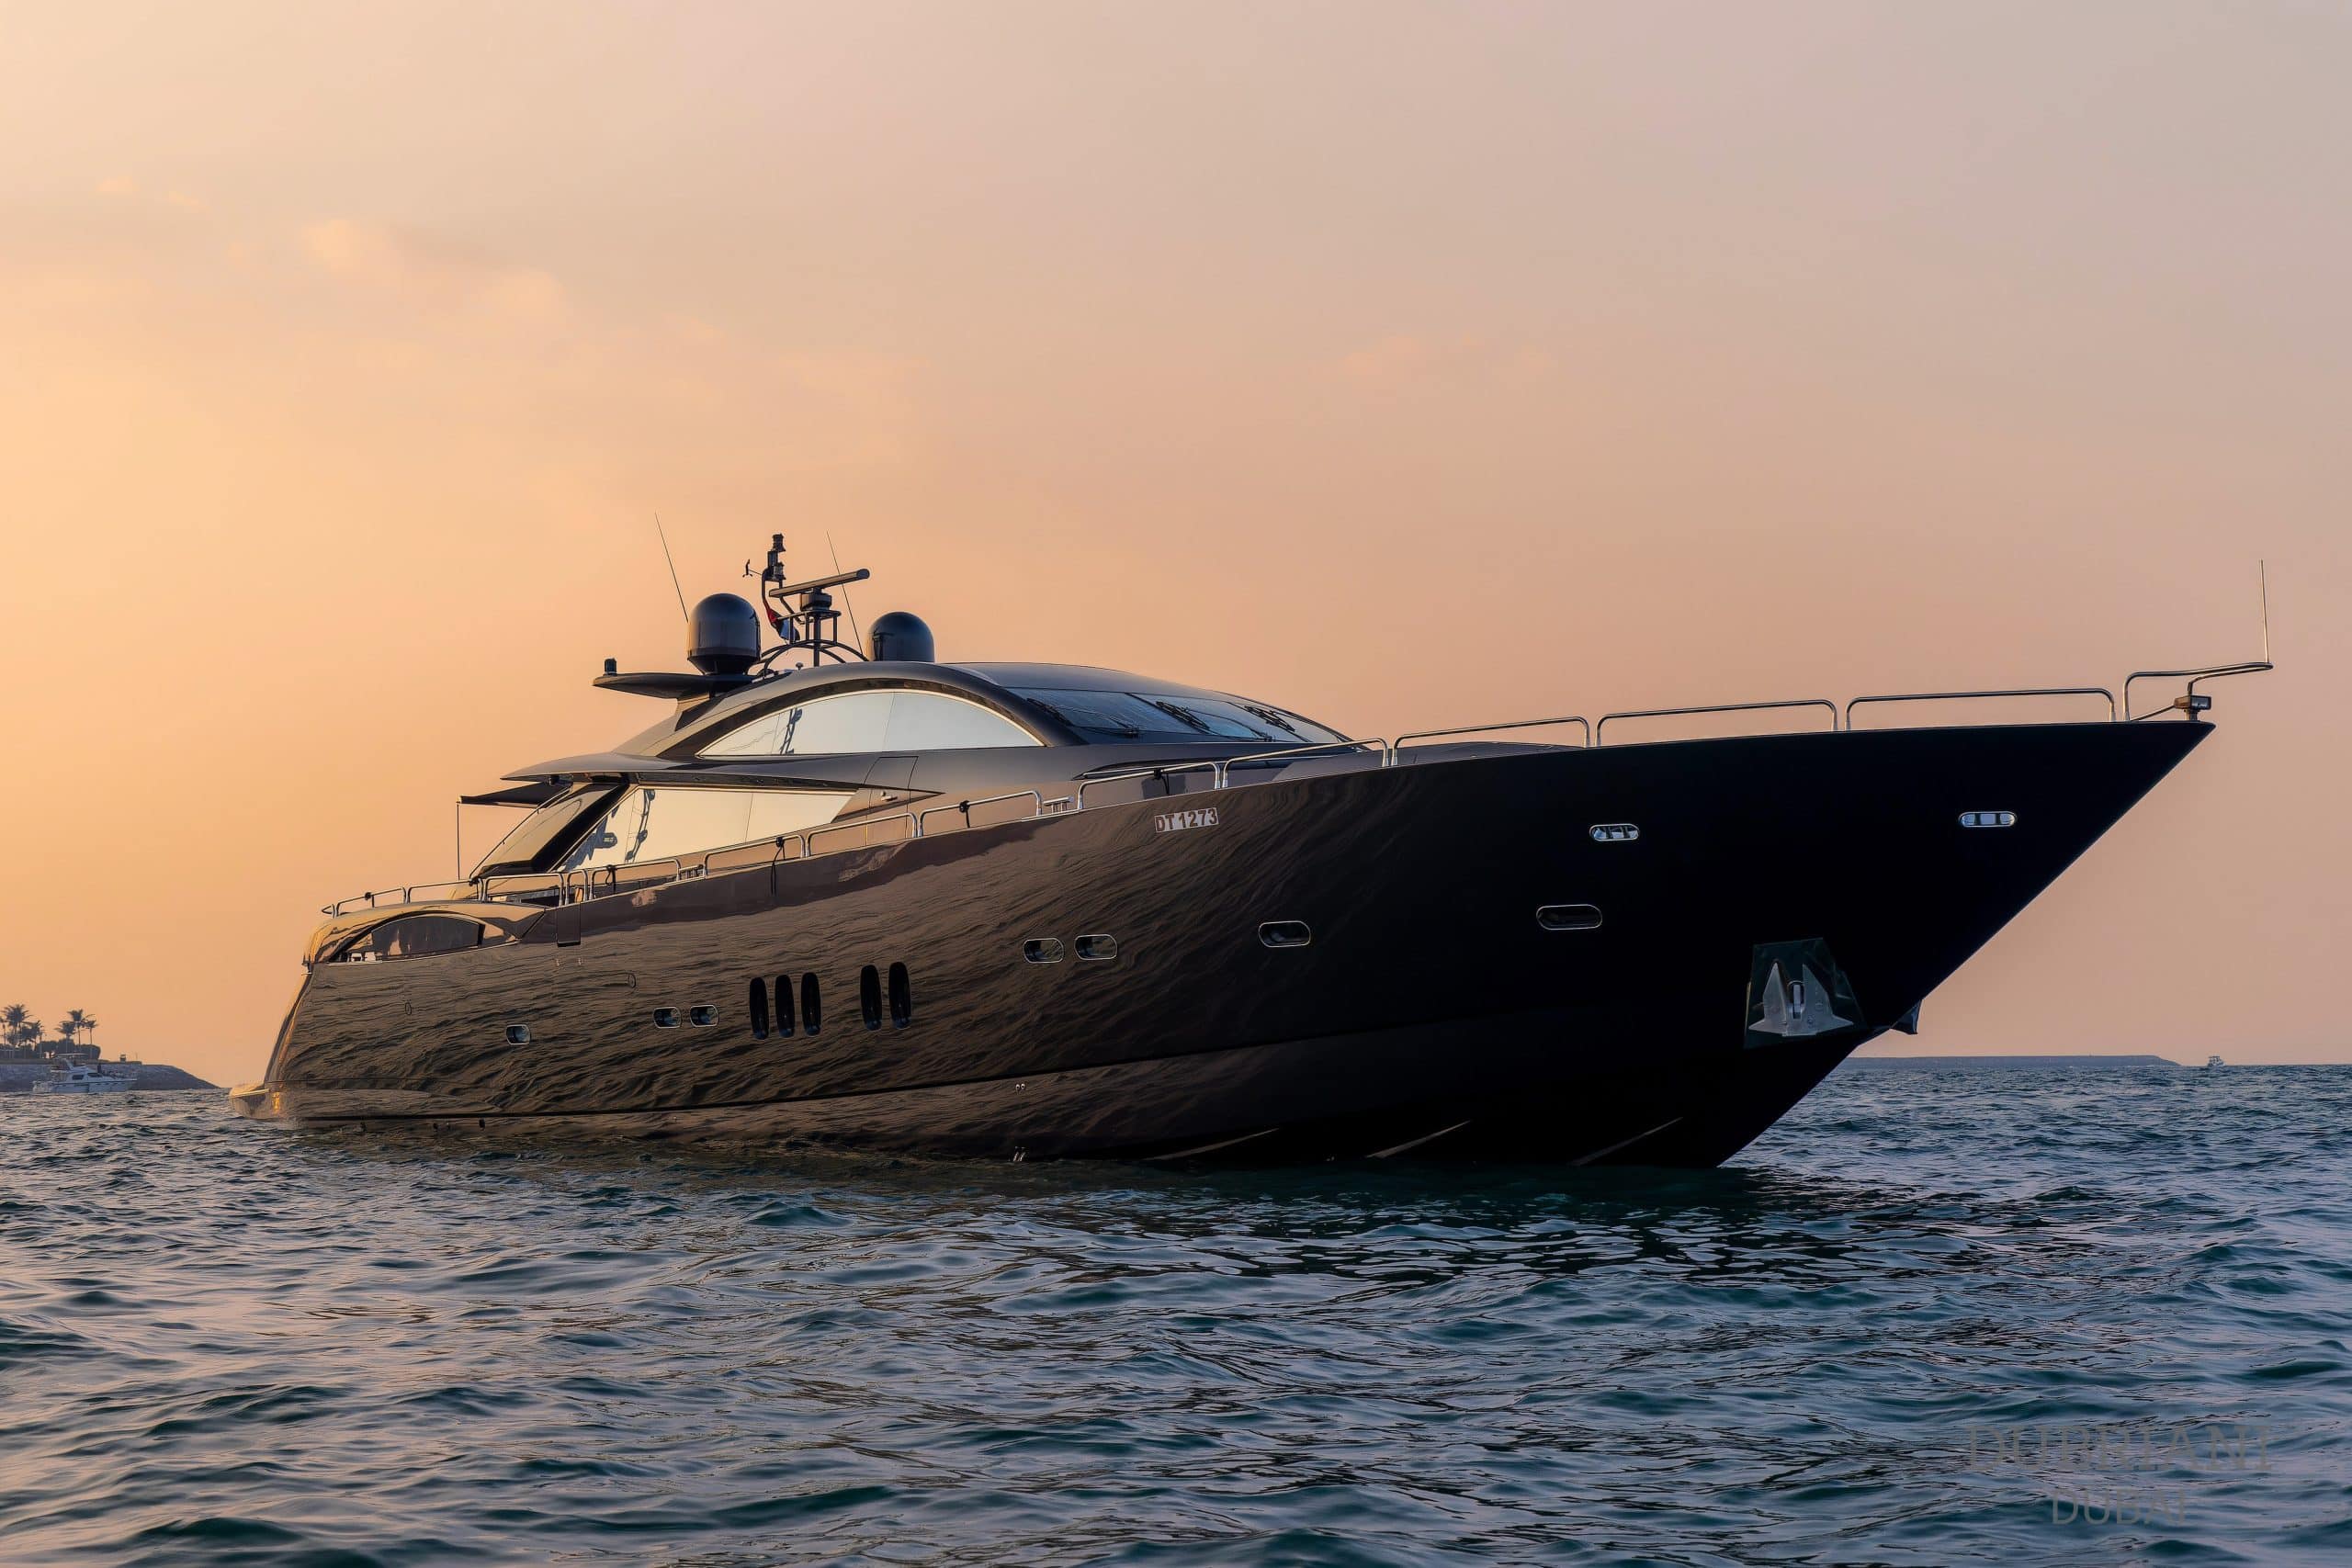 A day of relaxation and luxury on the Sunseeker 108 Predator in Dubai.